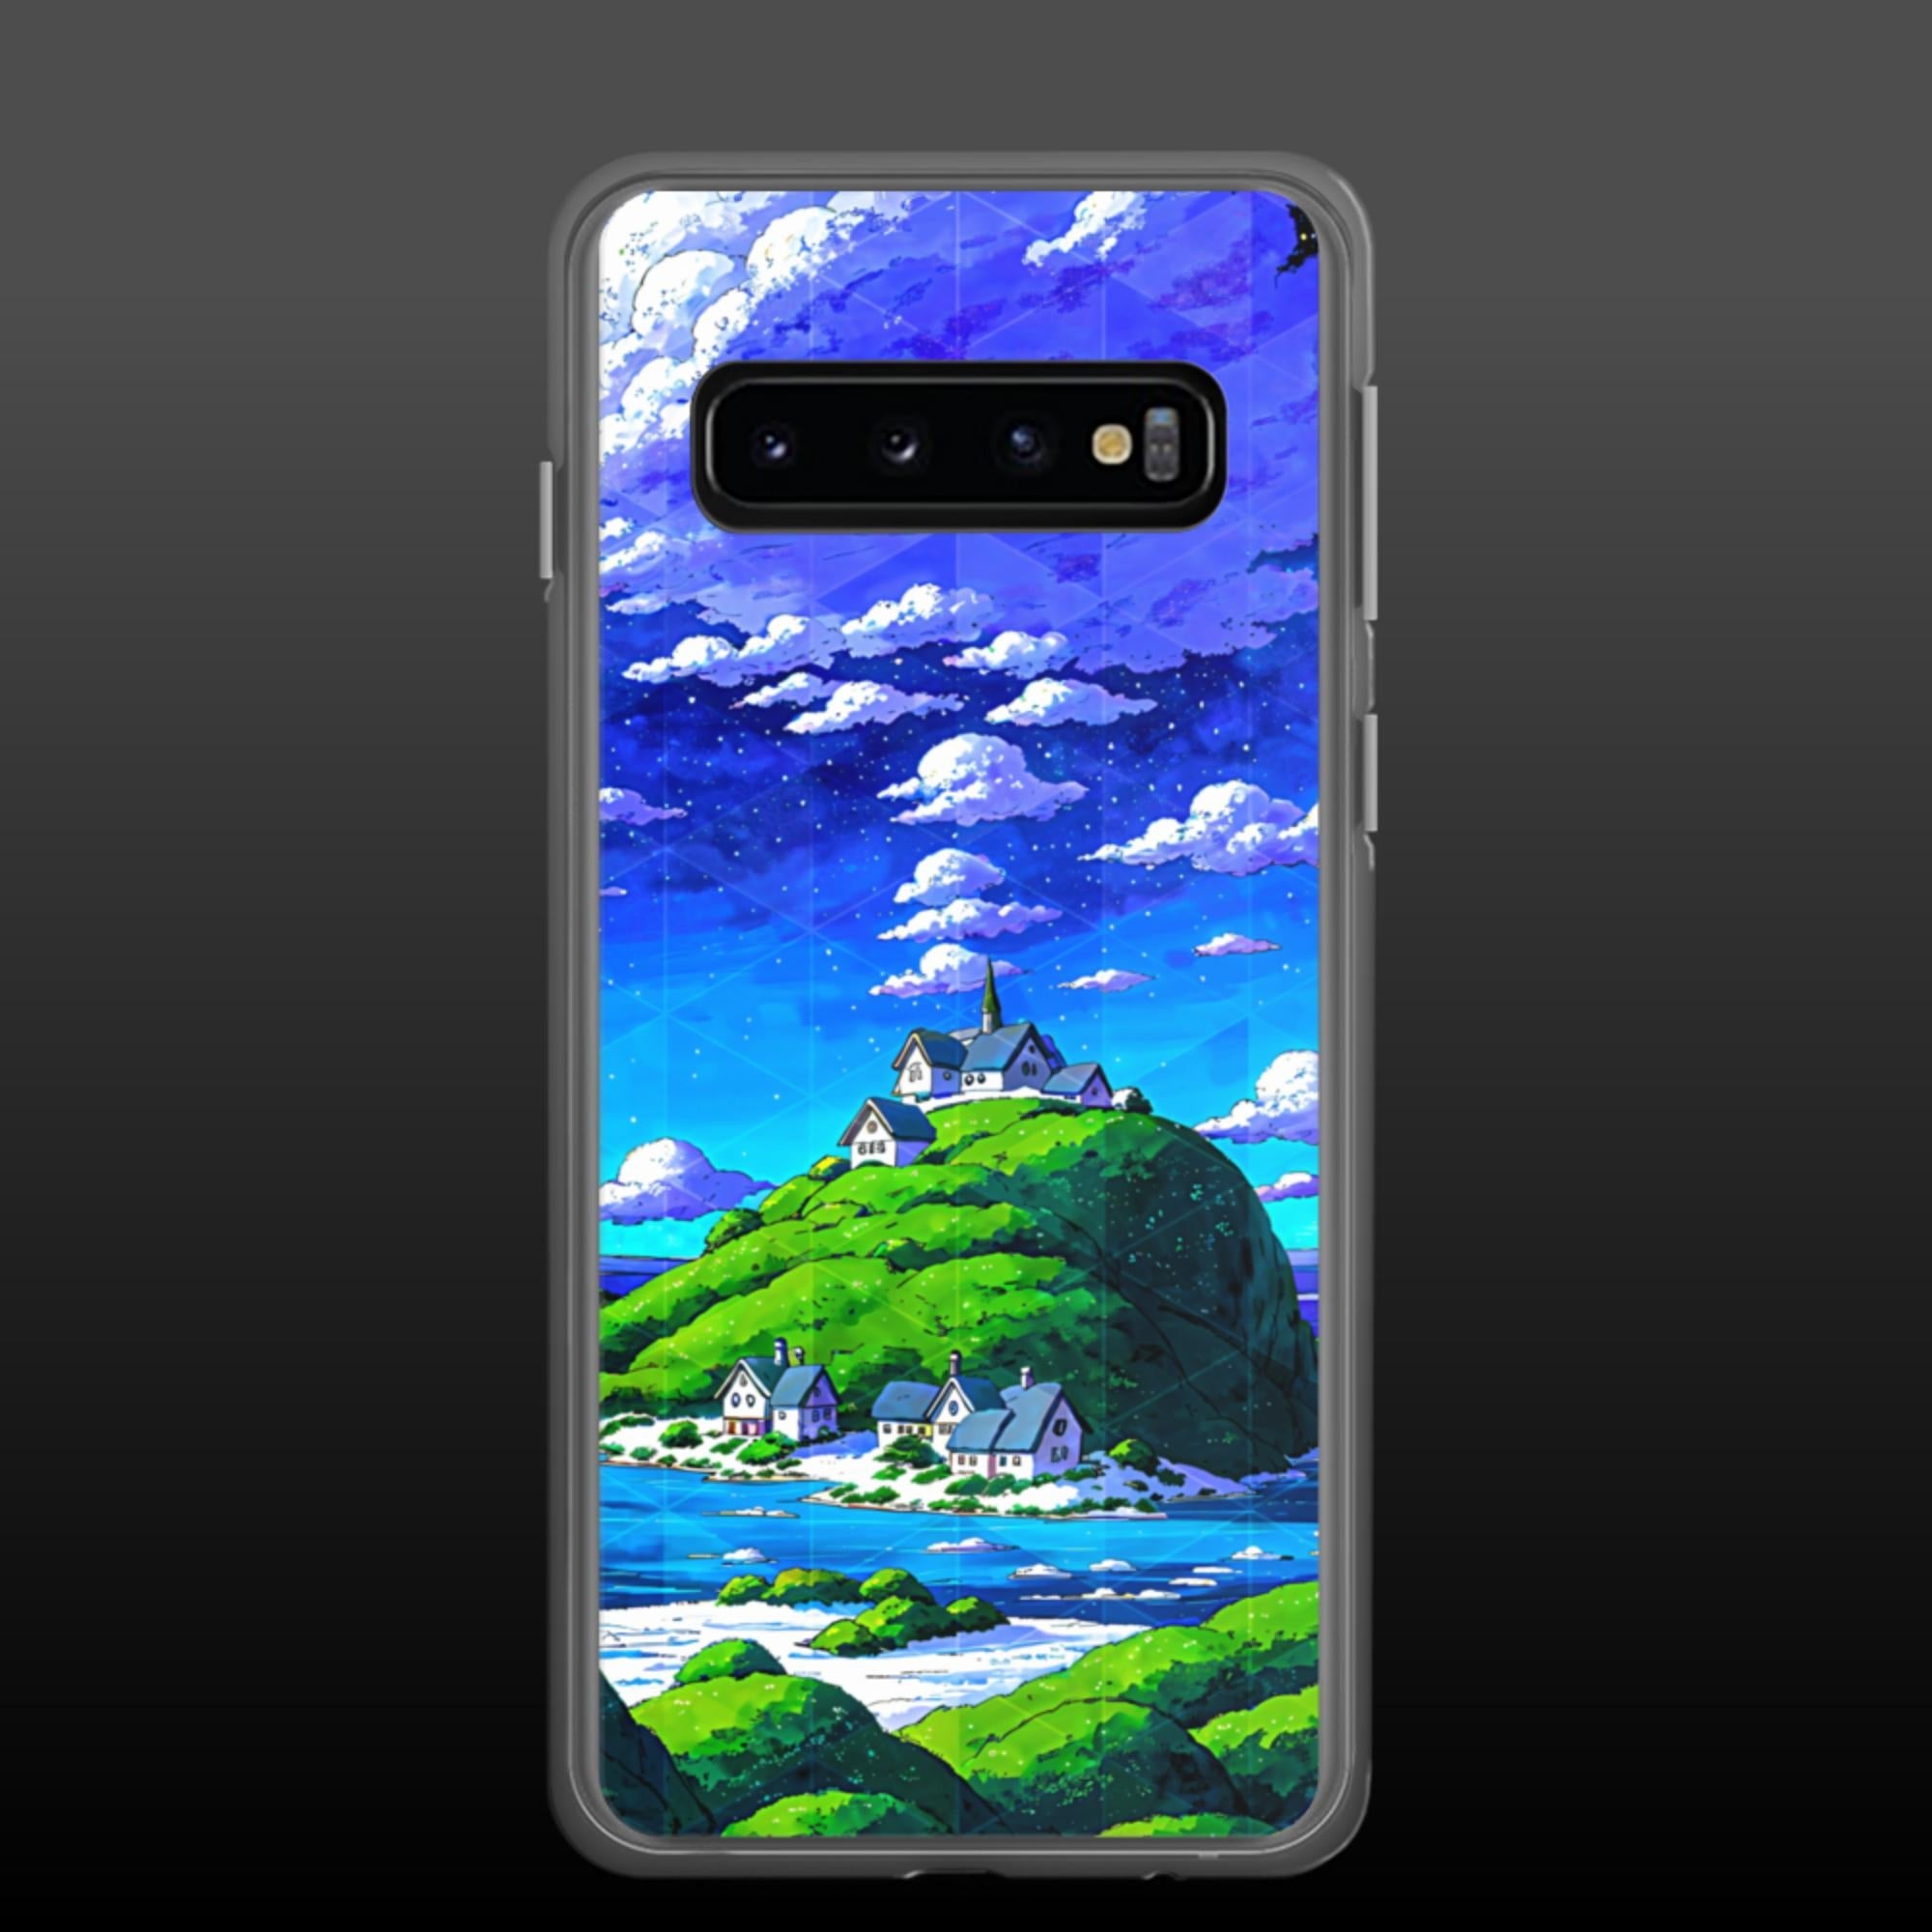 "Blissful world" clear samsung case - Clear samsung case - Ever colorful